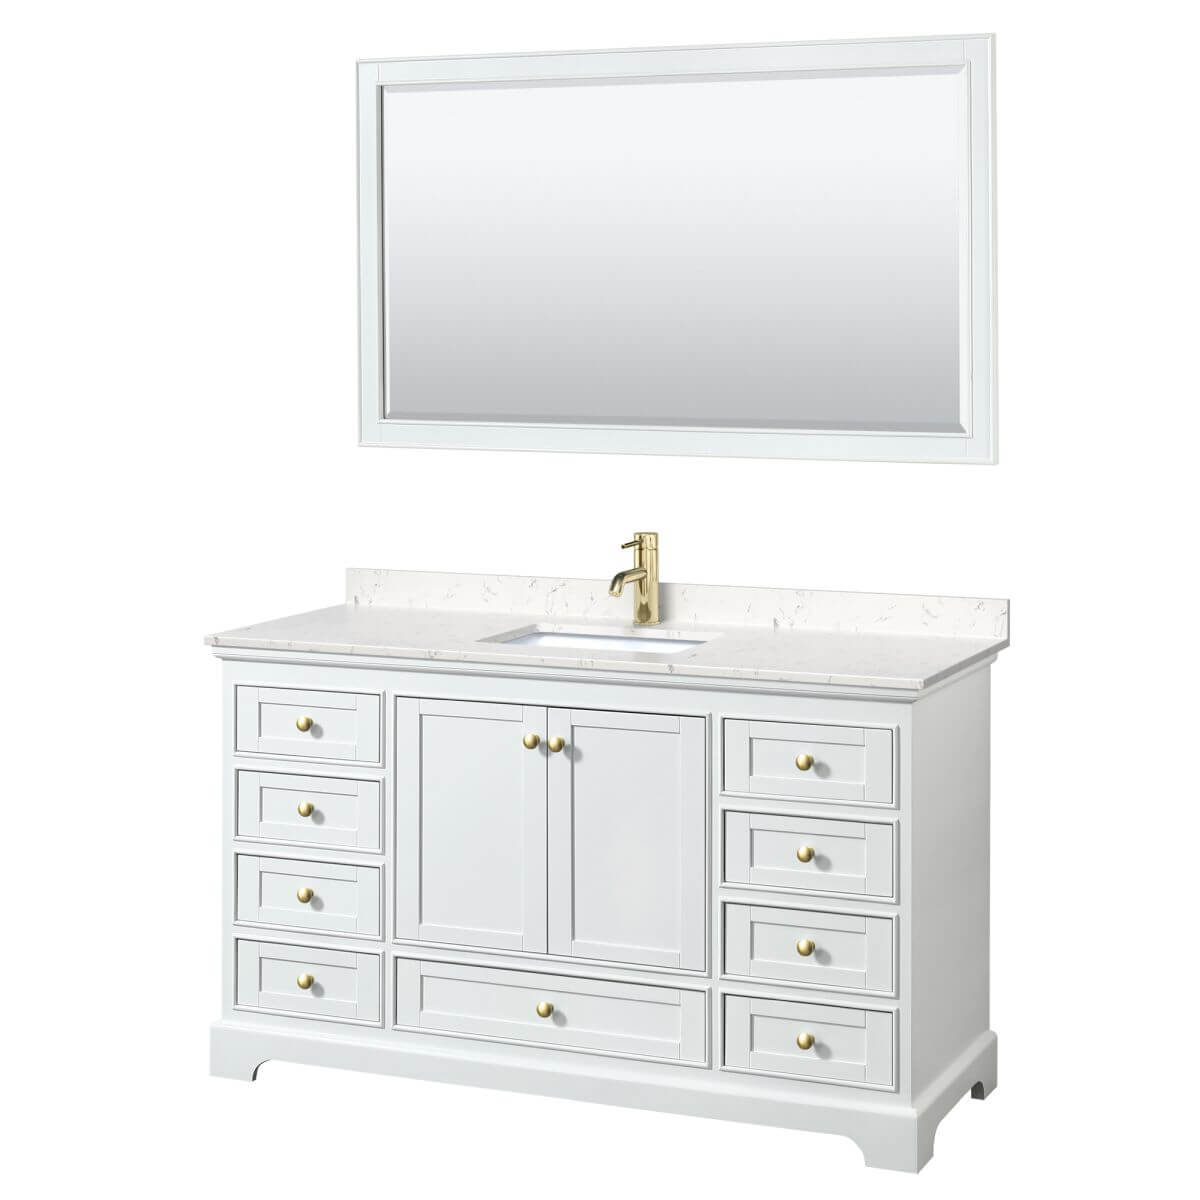 Wyndham Collection Deborah 60 inch Single Bathroom Vanity in White with Carrara Cultured Marble Countertop, Undermount Square Sink, Brushed Gold Trim and 58 inch Mirror - WCS202060SWGC2UNSM58